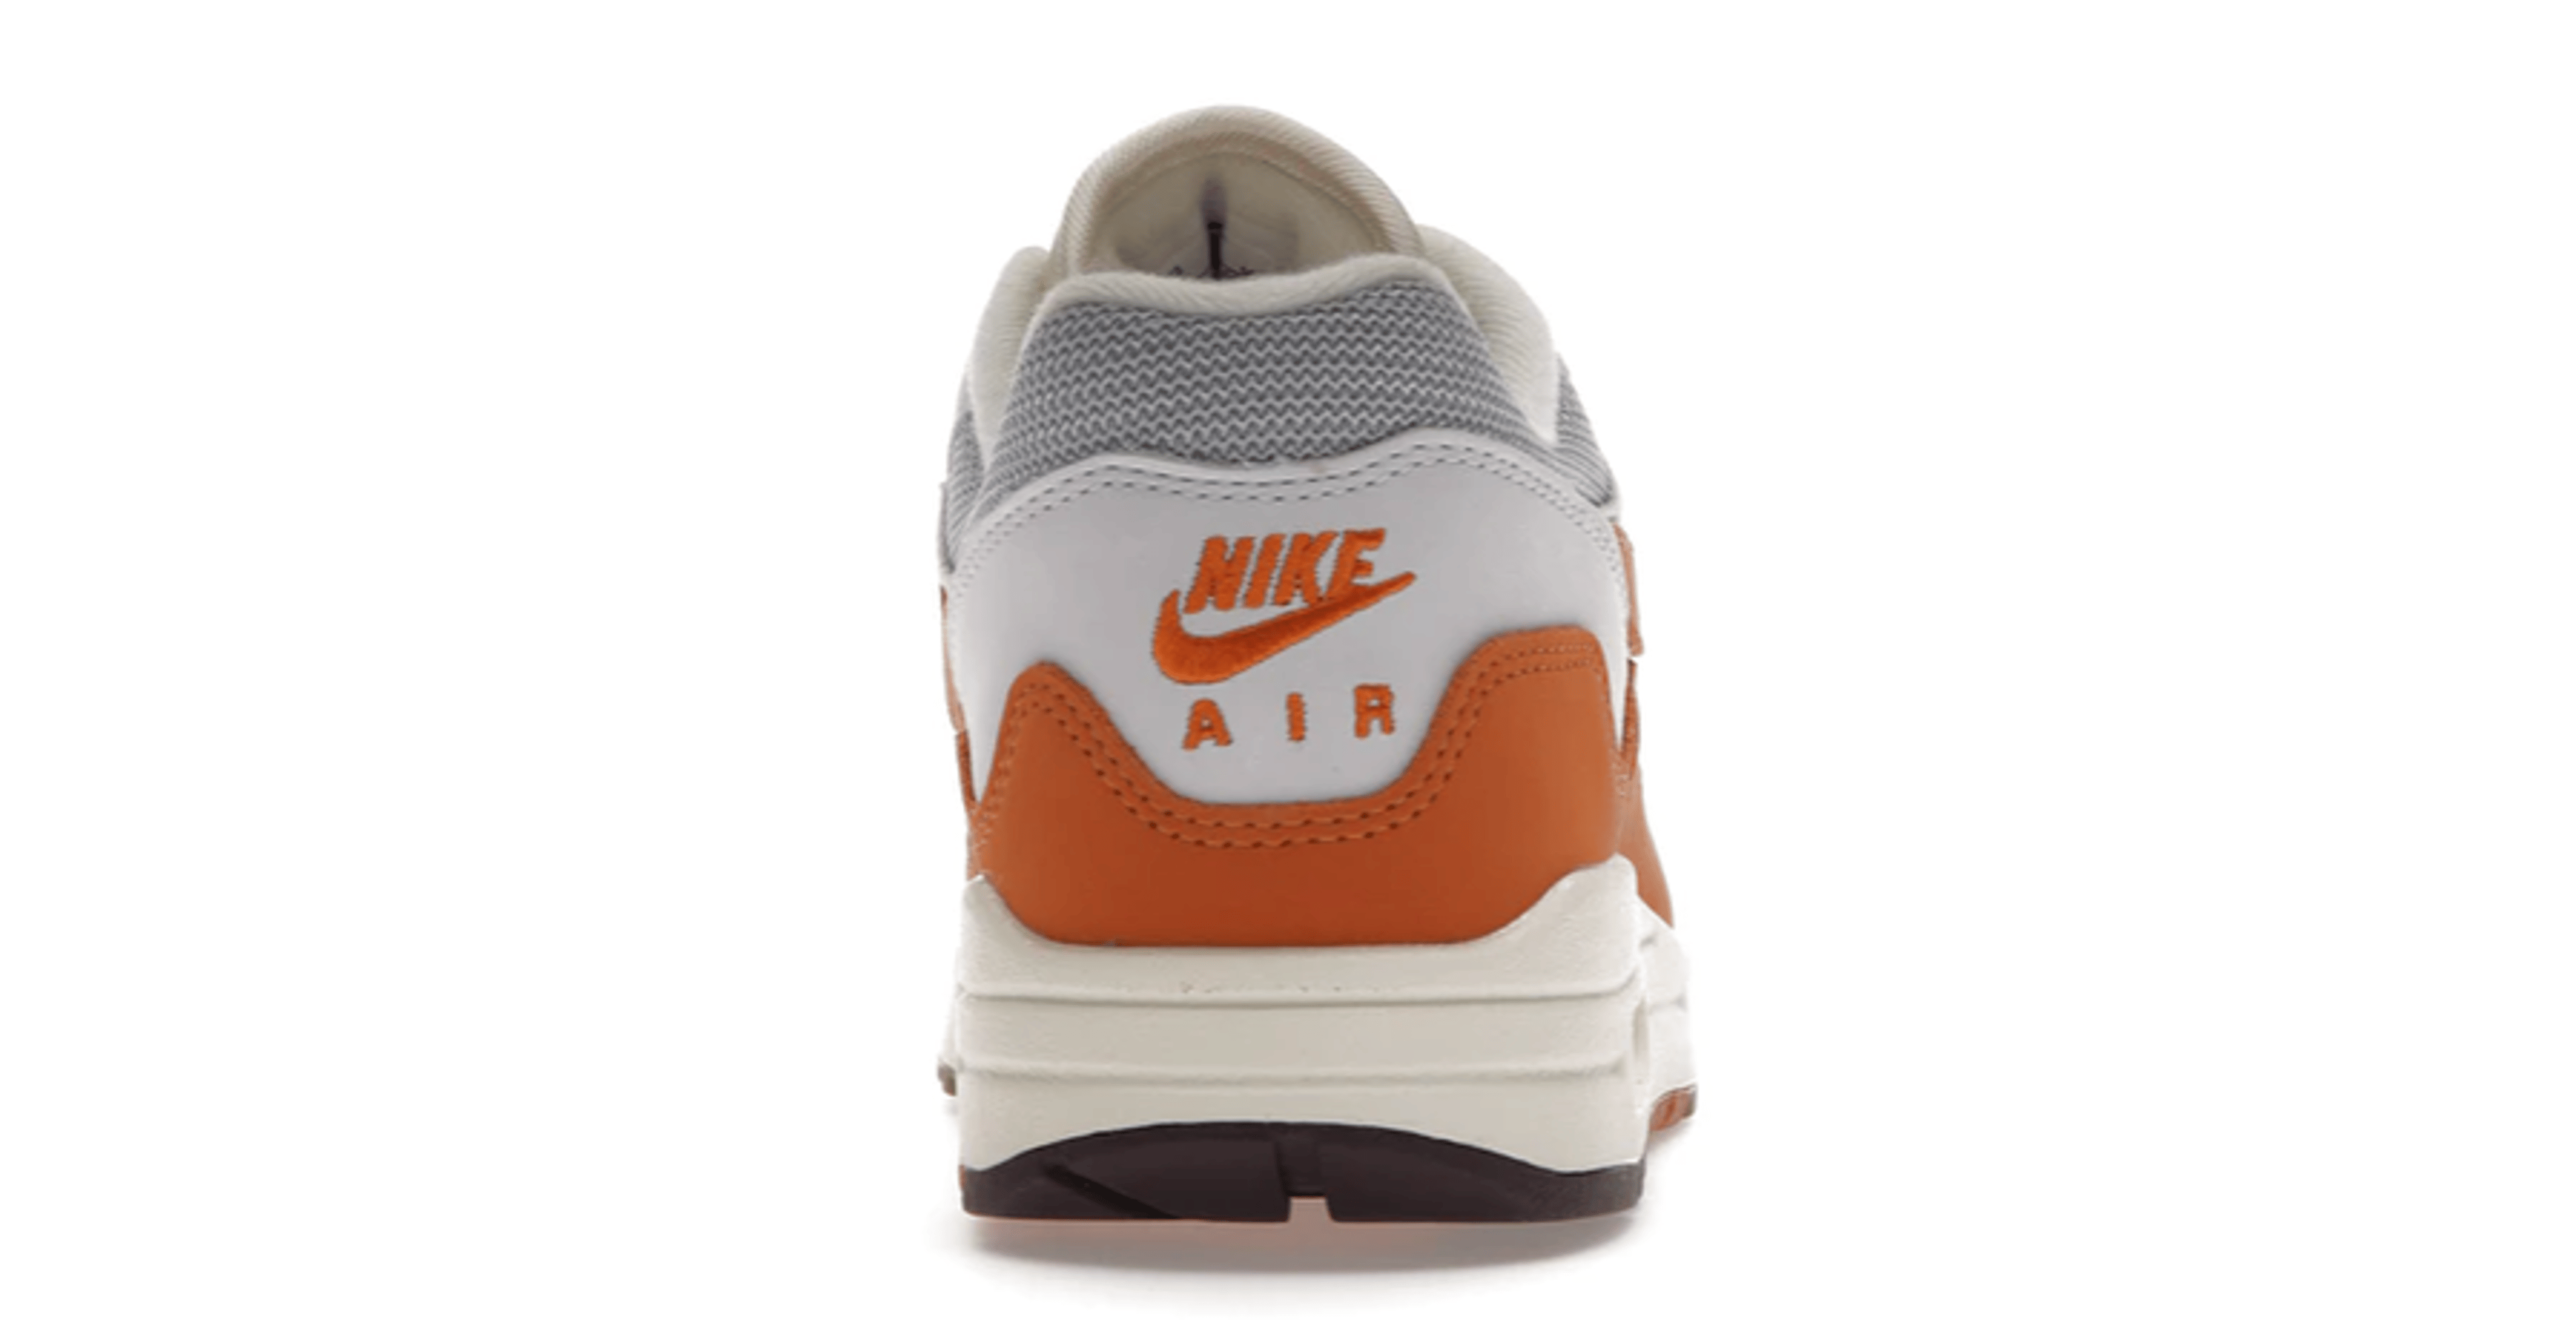 Alternate View 1 of Nike Air Max 1 Patta Waves Monarch (Without Bracelet)